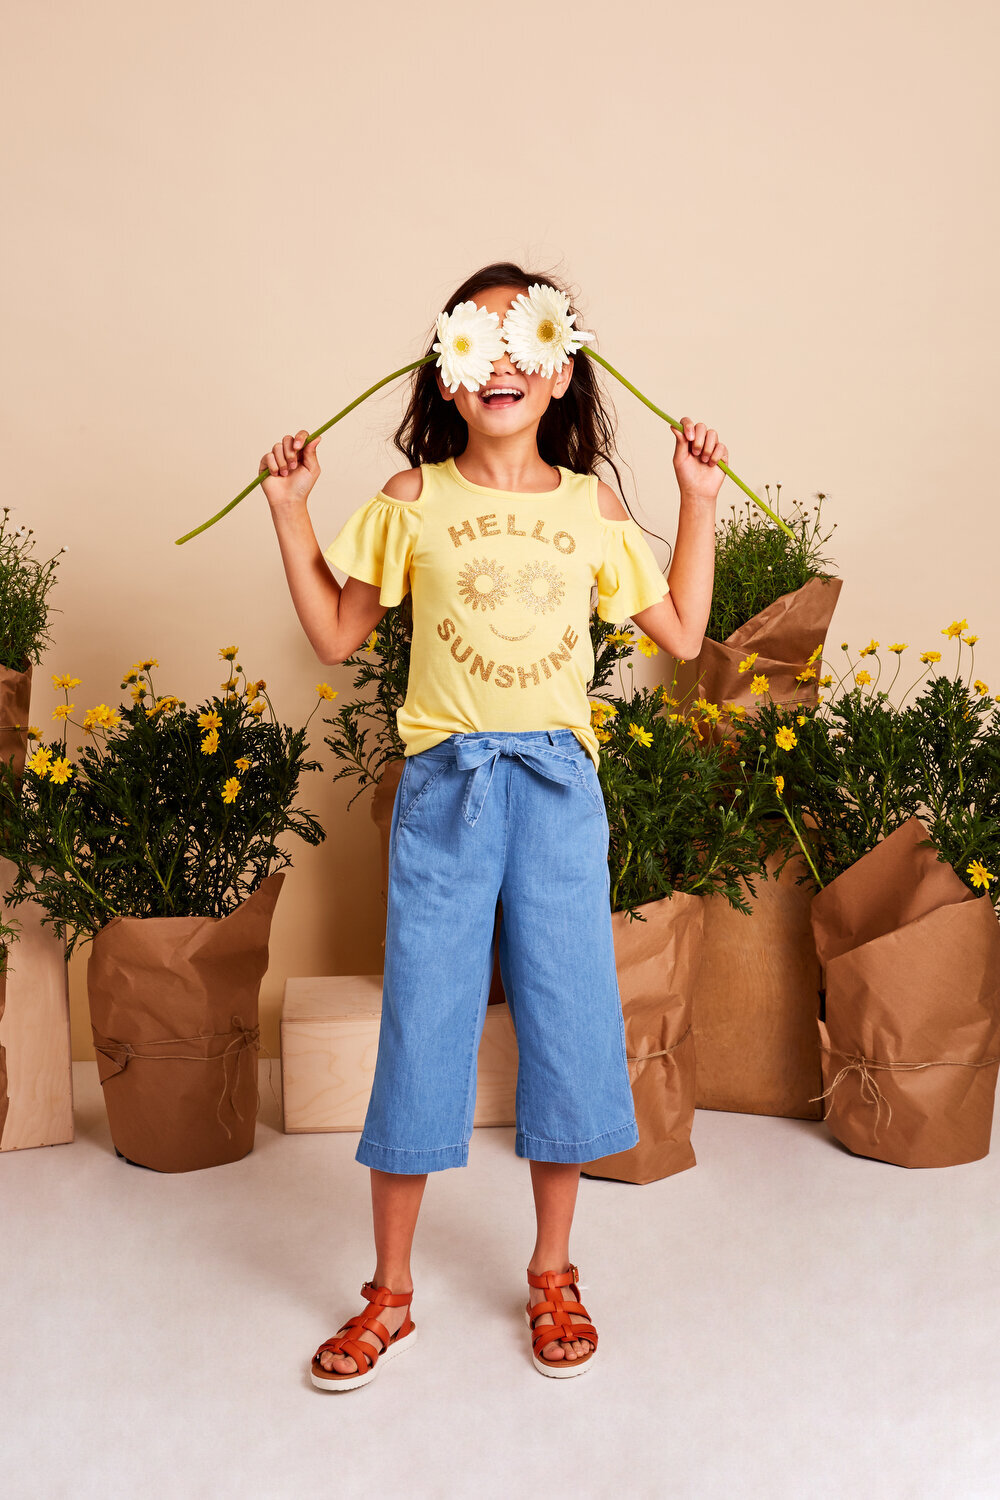 Greer Rivera Photography Kids Editorial Photoshoots Marin CA Girl Holding Daisies in front of her eyes with plants in the background